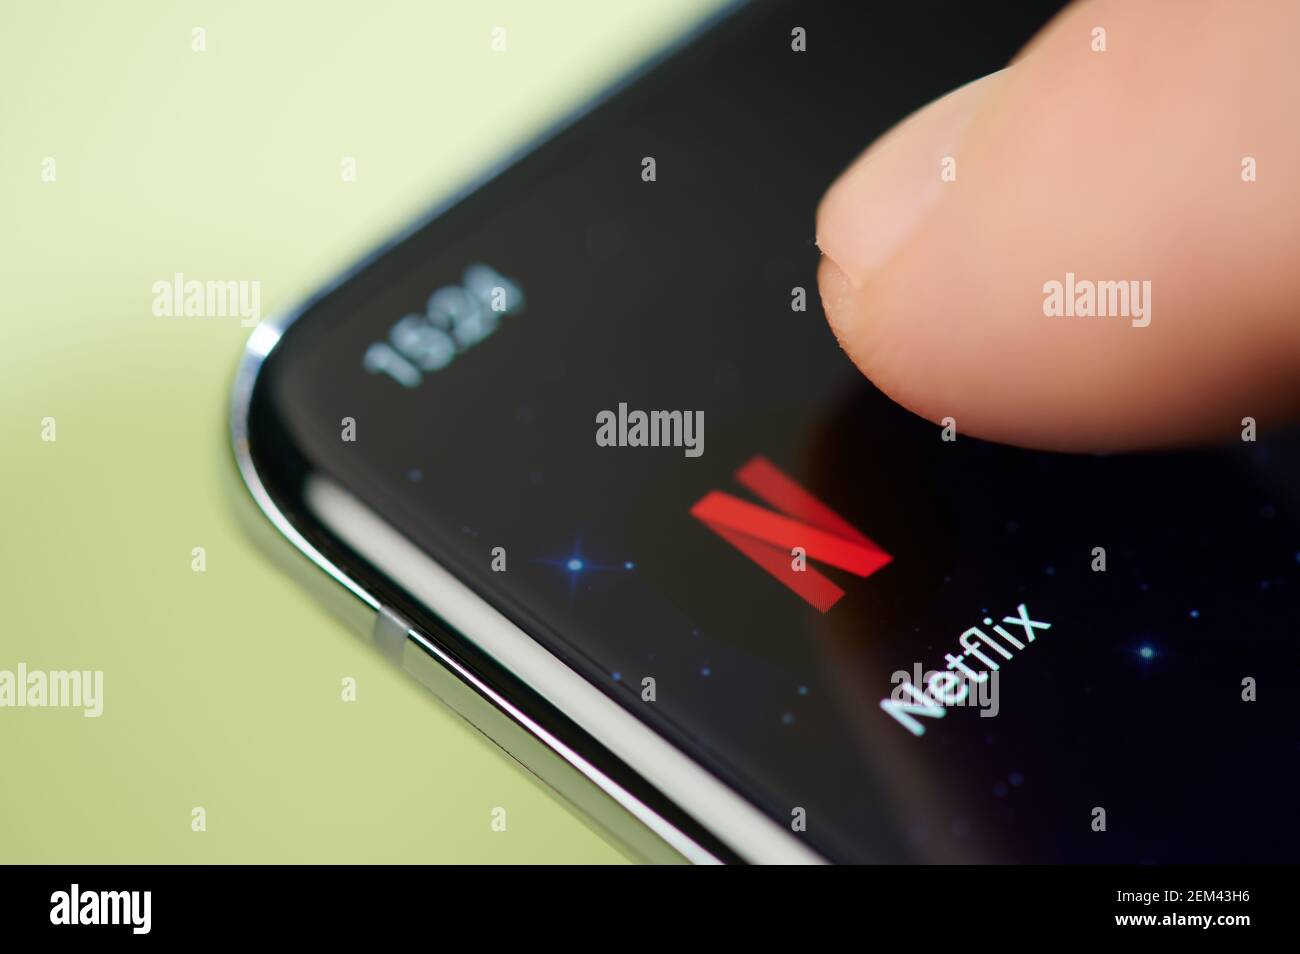 New york, USA - February 24, 2021: Netflix app on smartphone screen touch with finger macro close up view Stock Photo